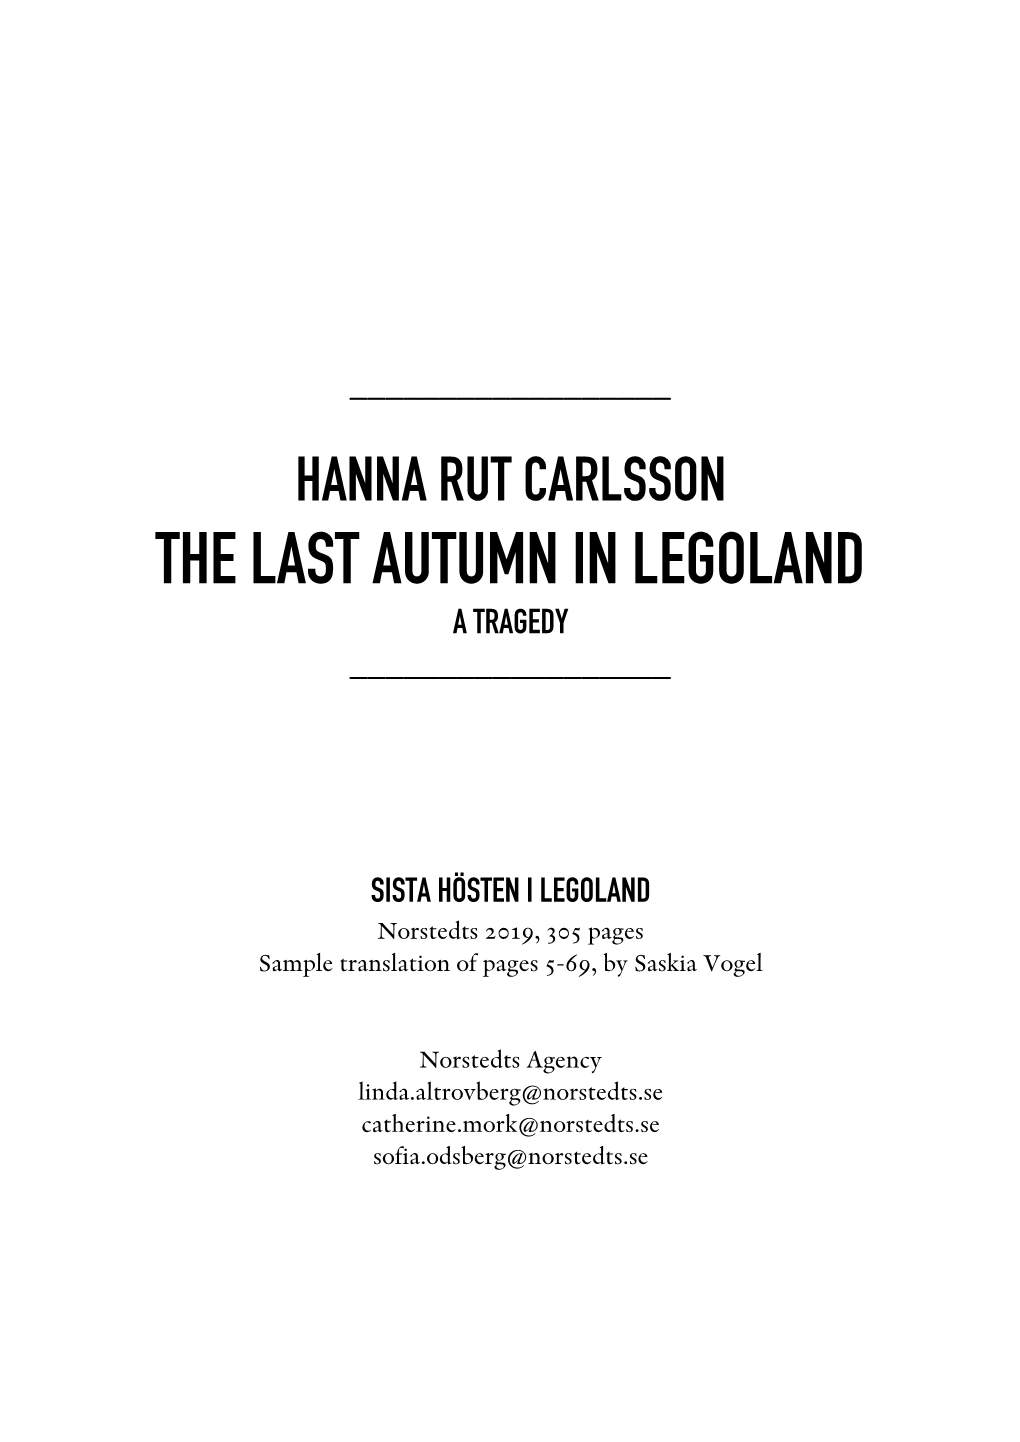 The Last Autumn in Legoland a Tragedy ______